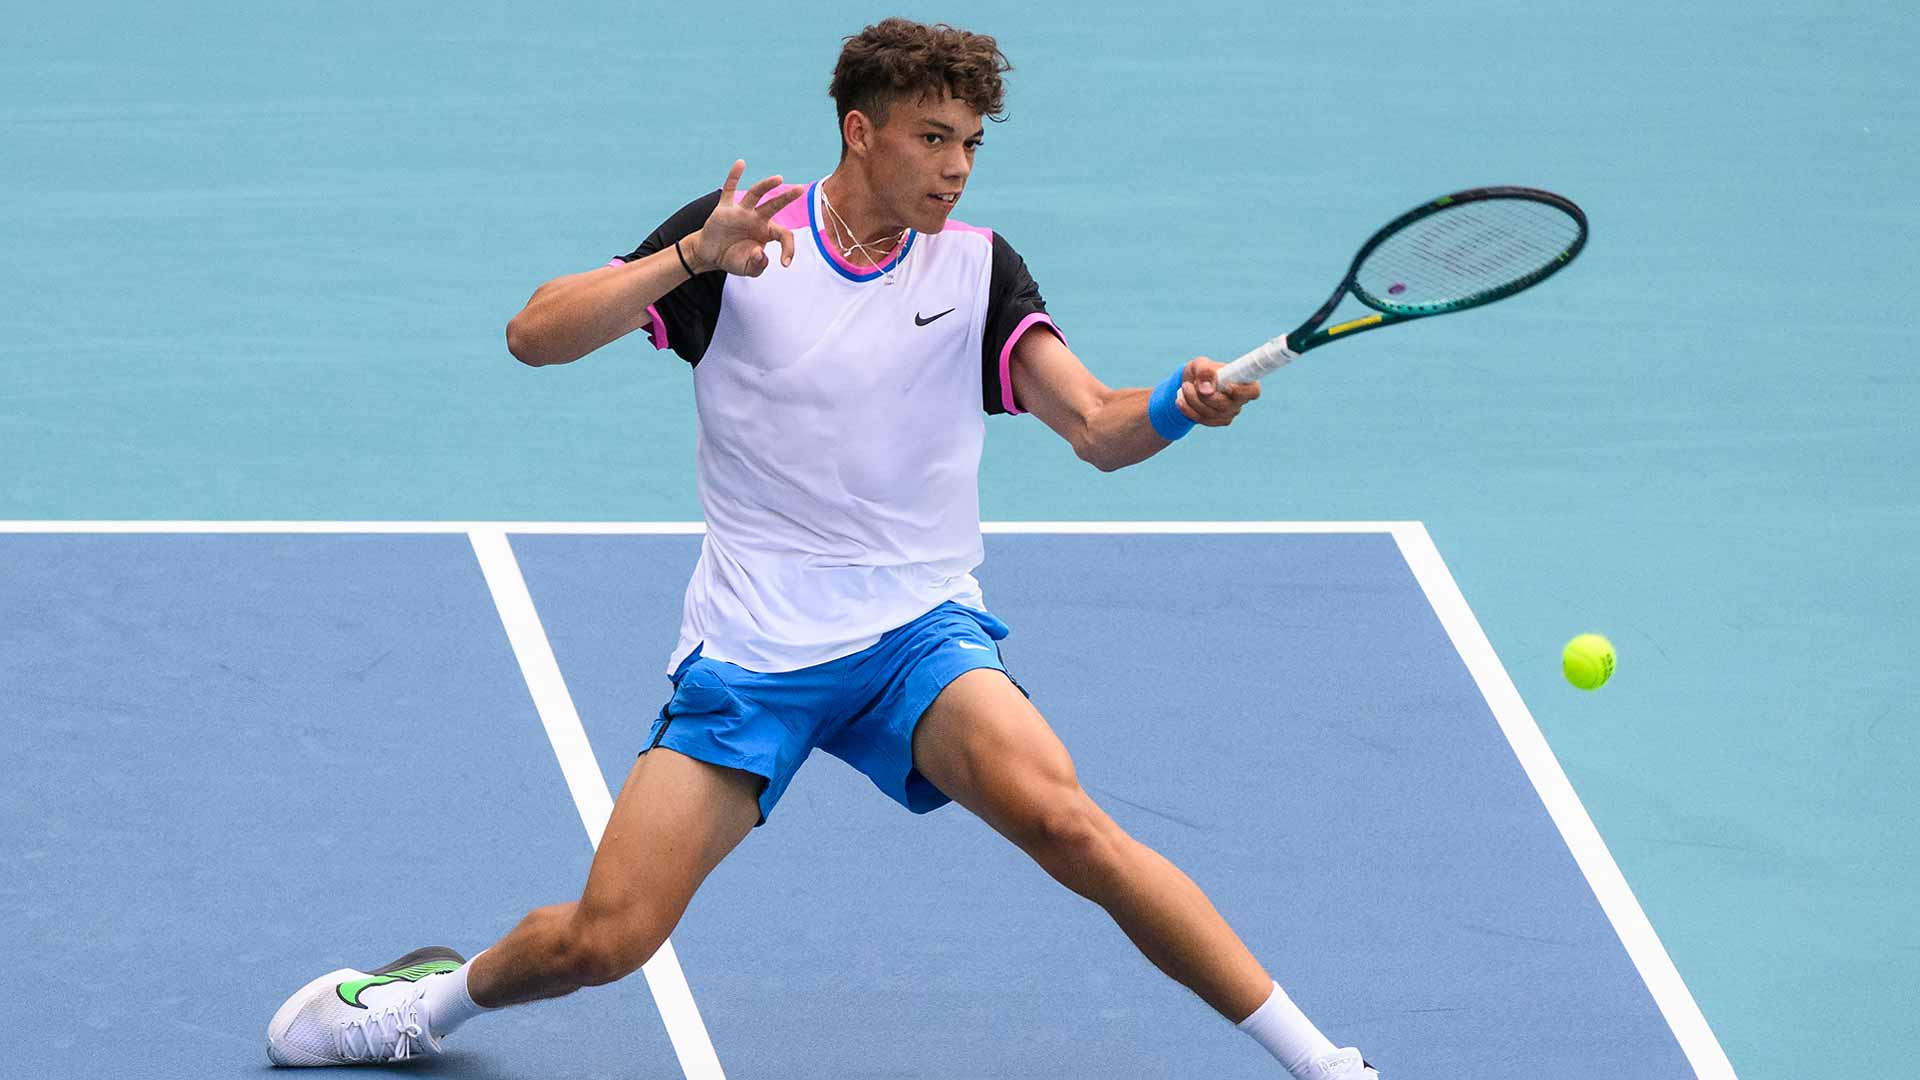 Blanch, 16, looks ahead to Nadal clash: 'Enjoy every moment'